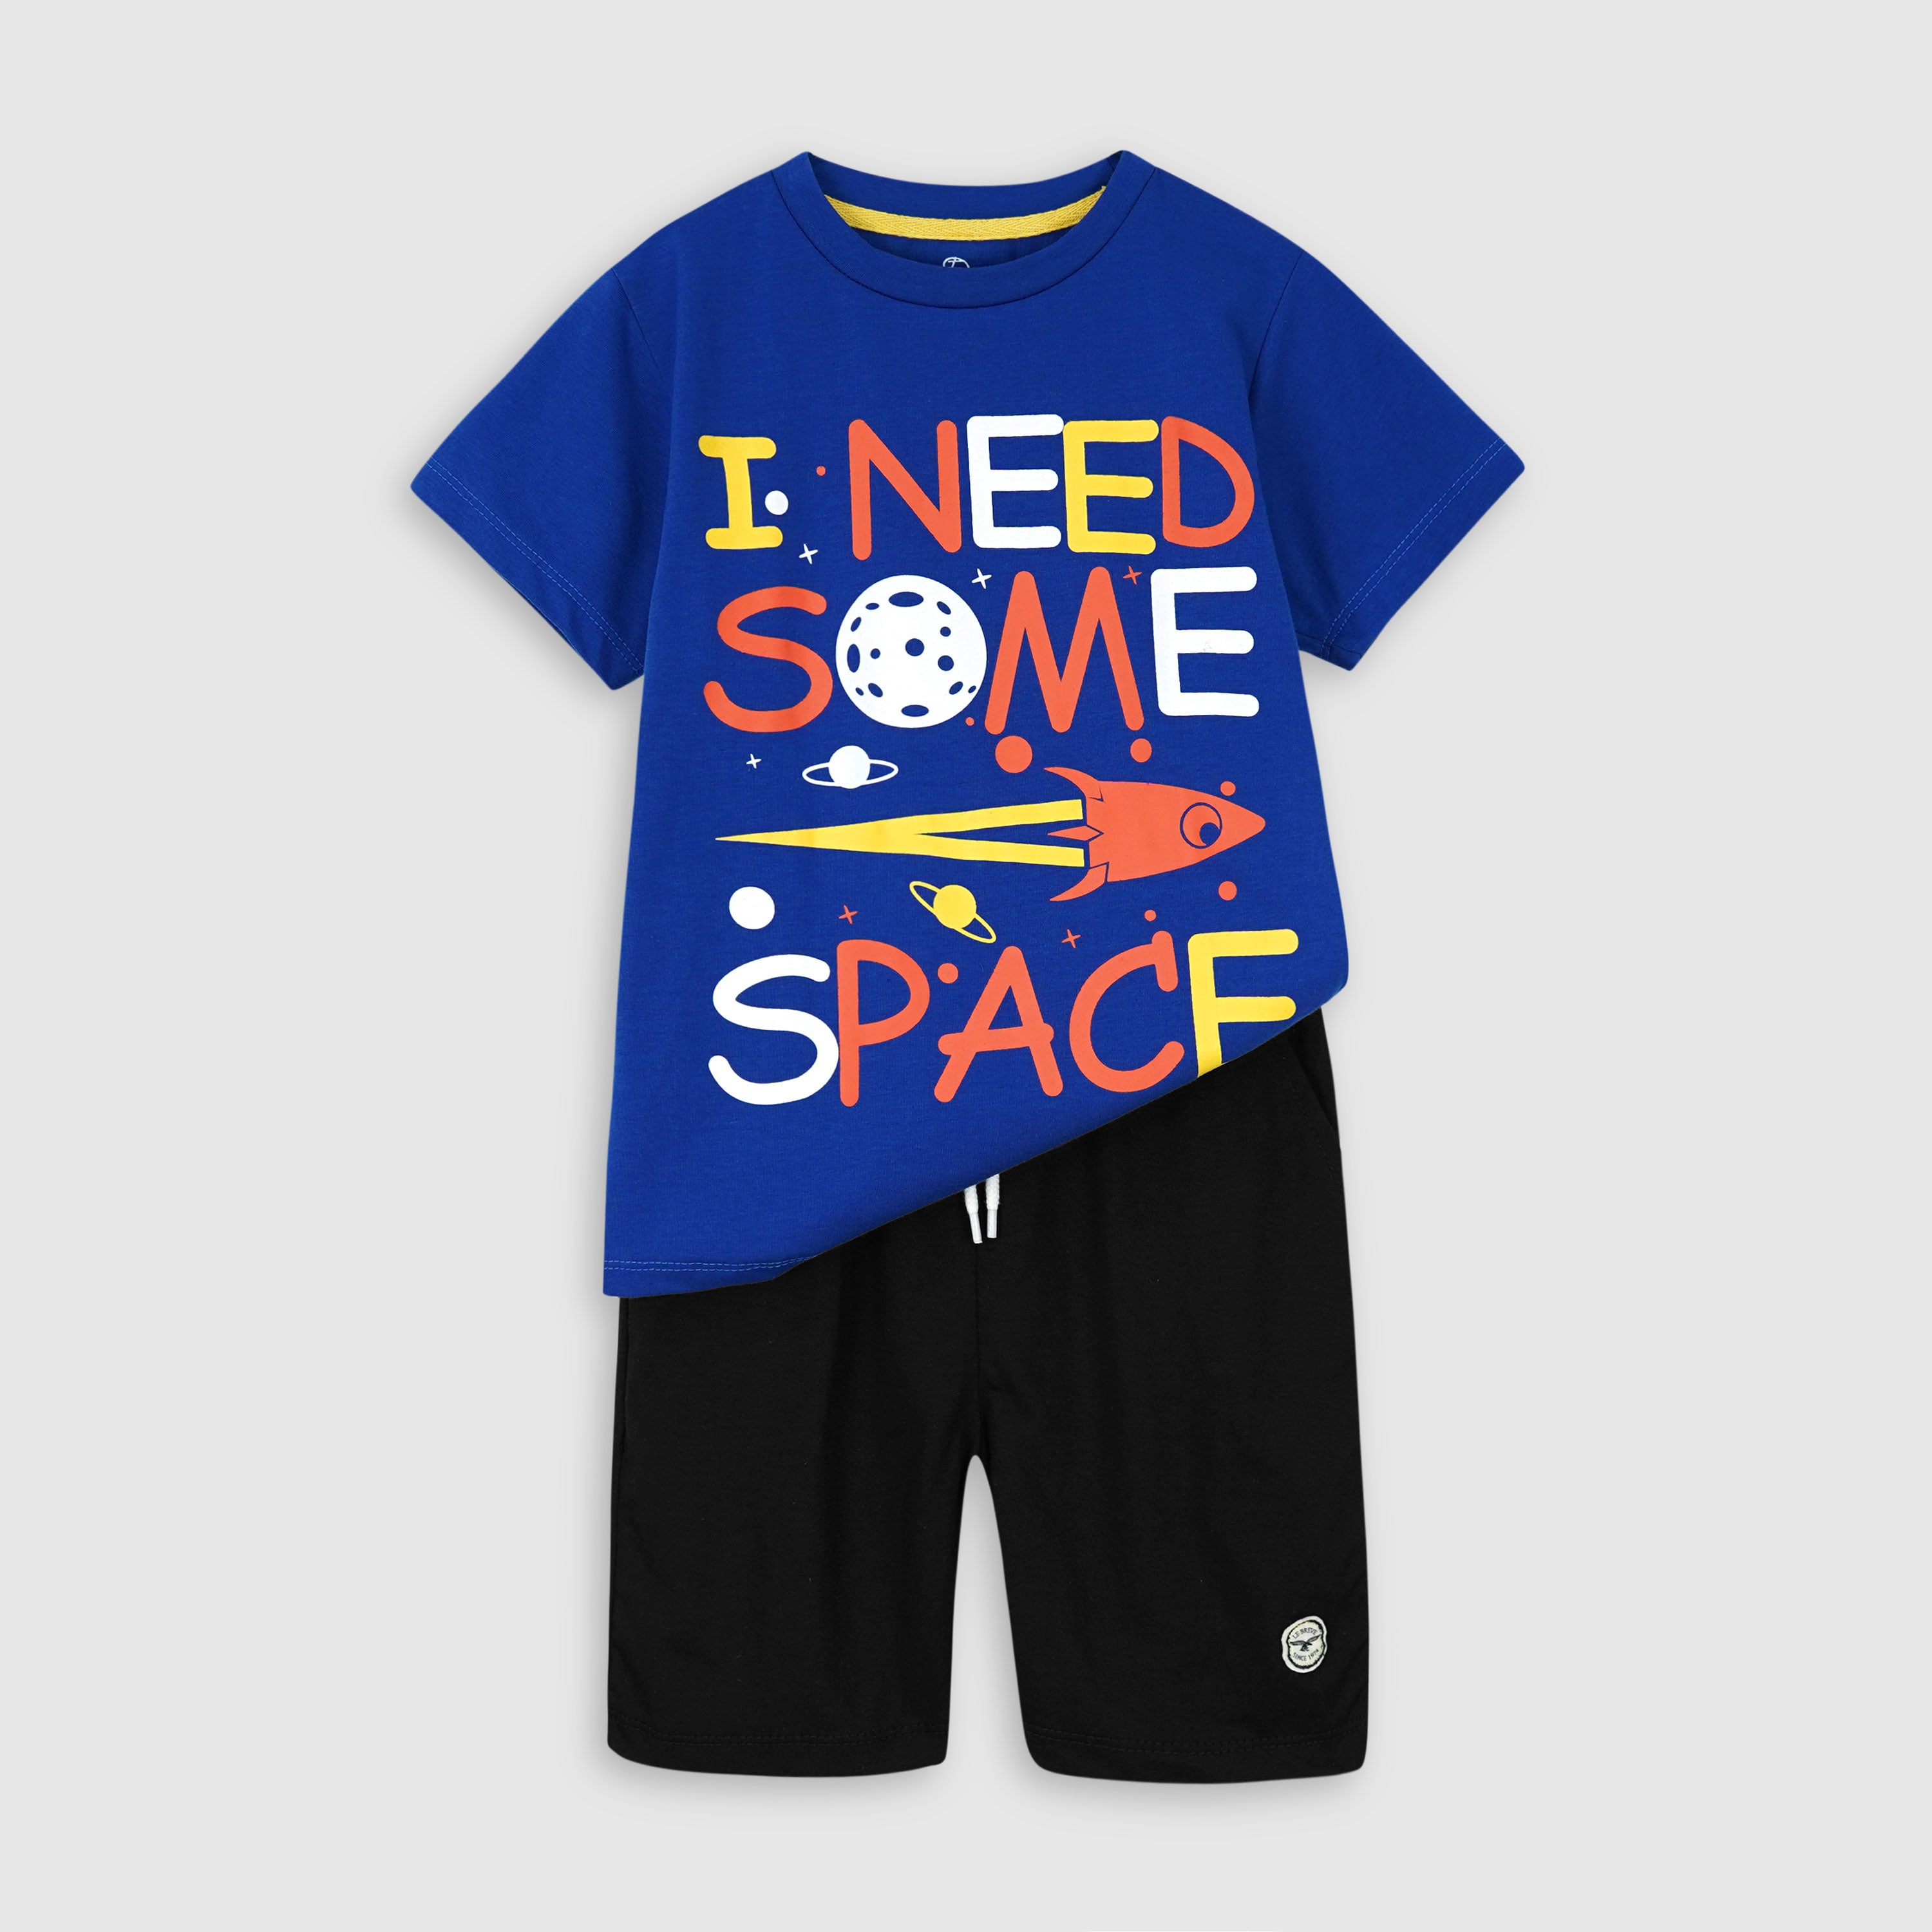 Need Some Space Printed T-shirt & Shorts Set